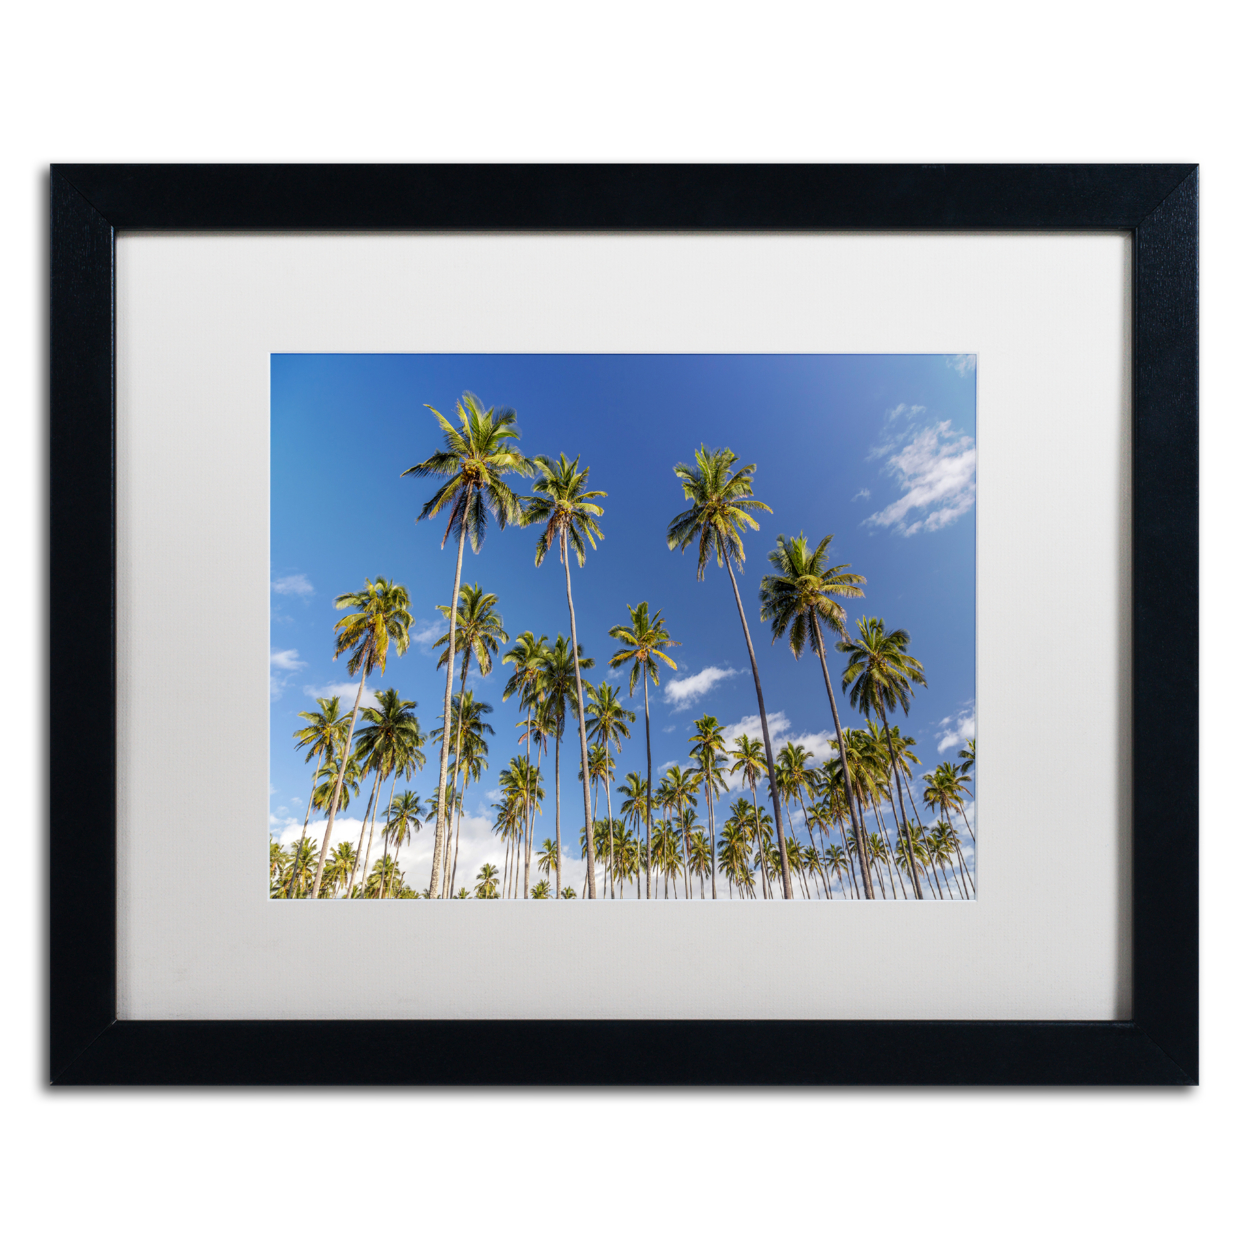 Pierre Leclerc 'Coconut Grove' Black Wooden Framed Art 18 X 22 Inches